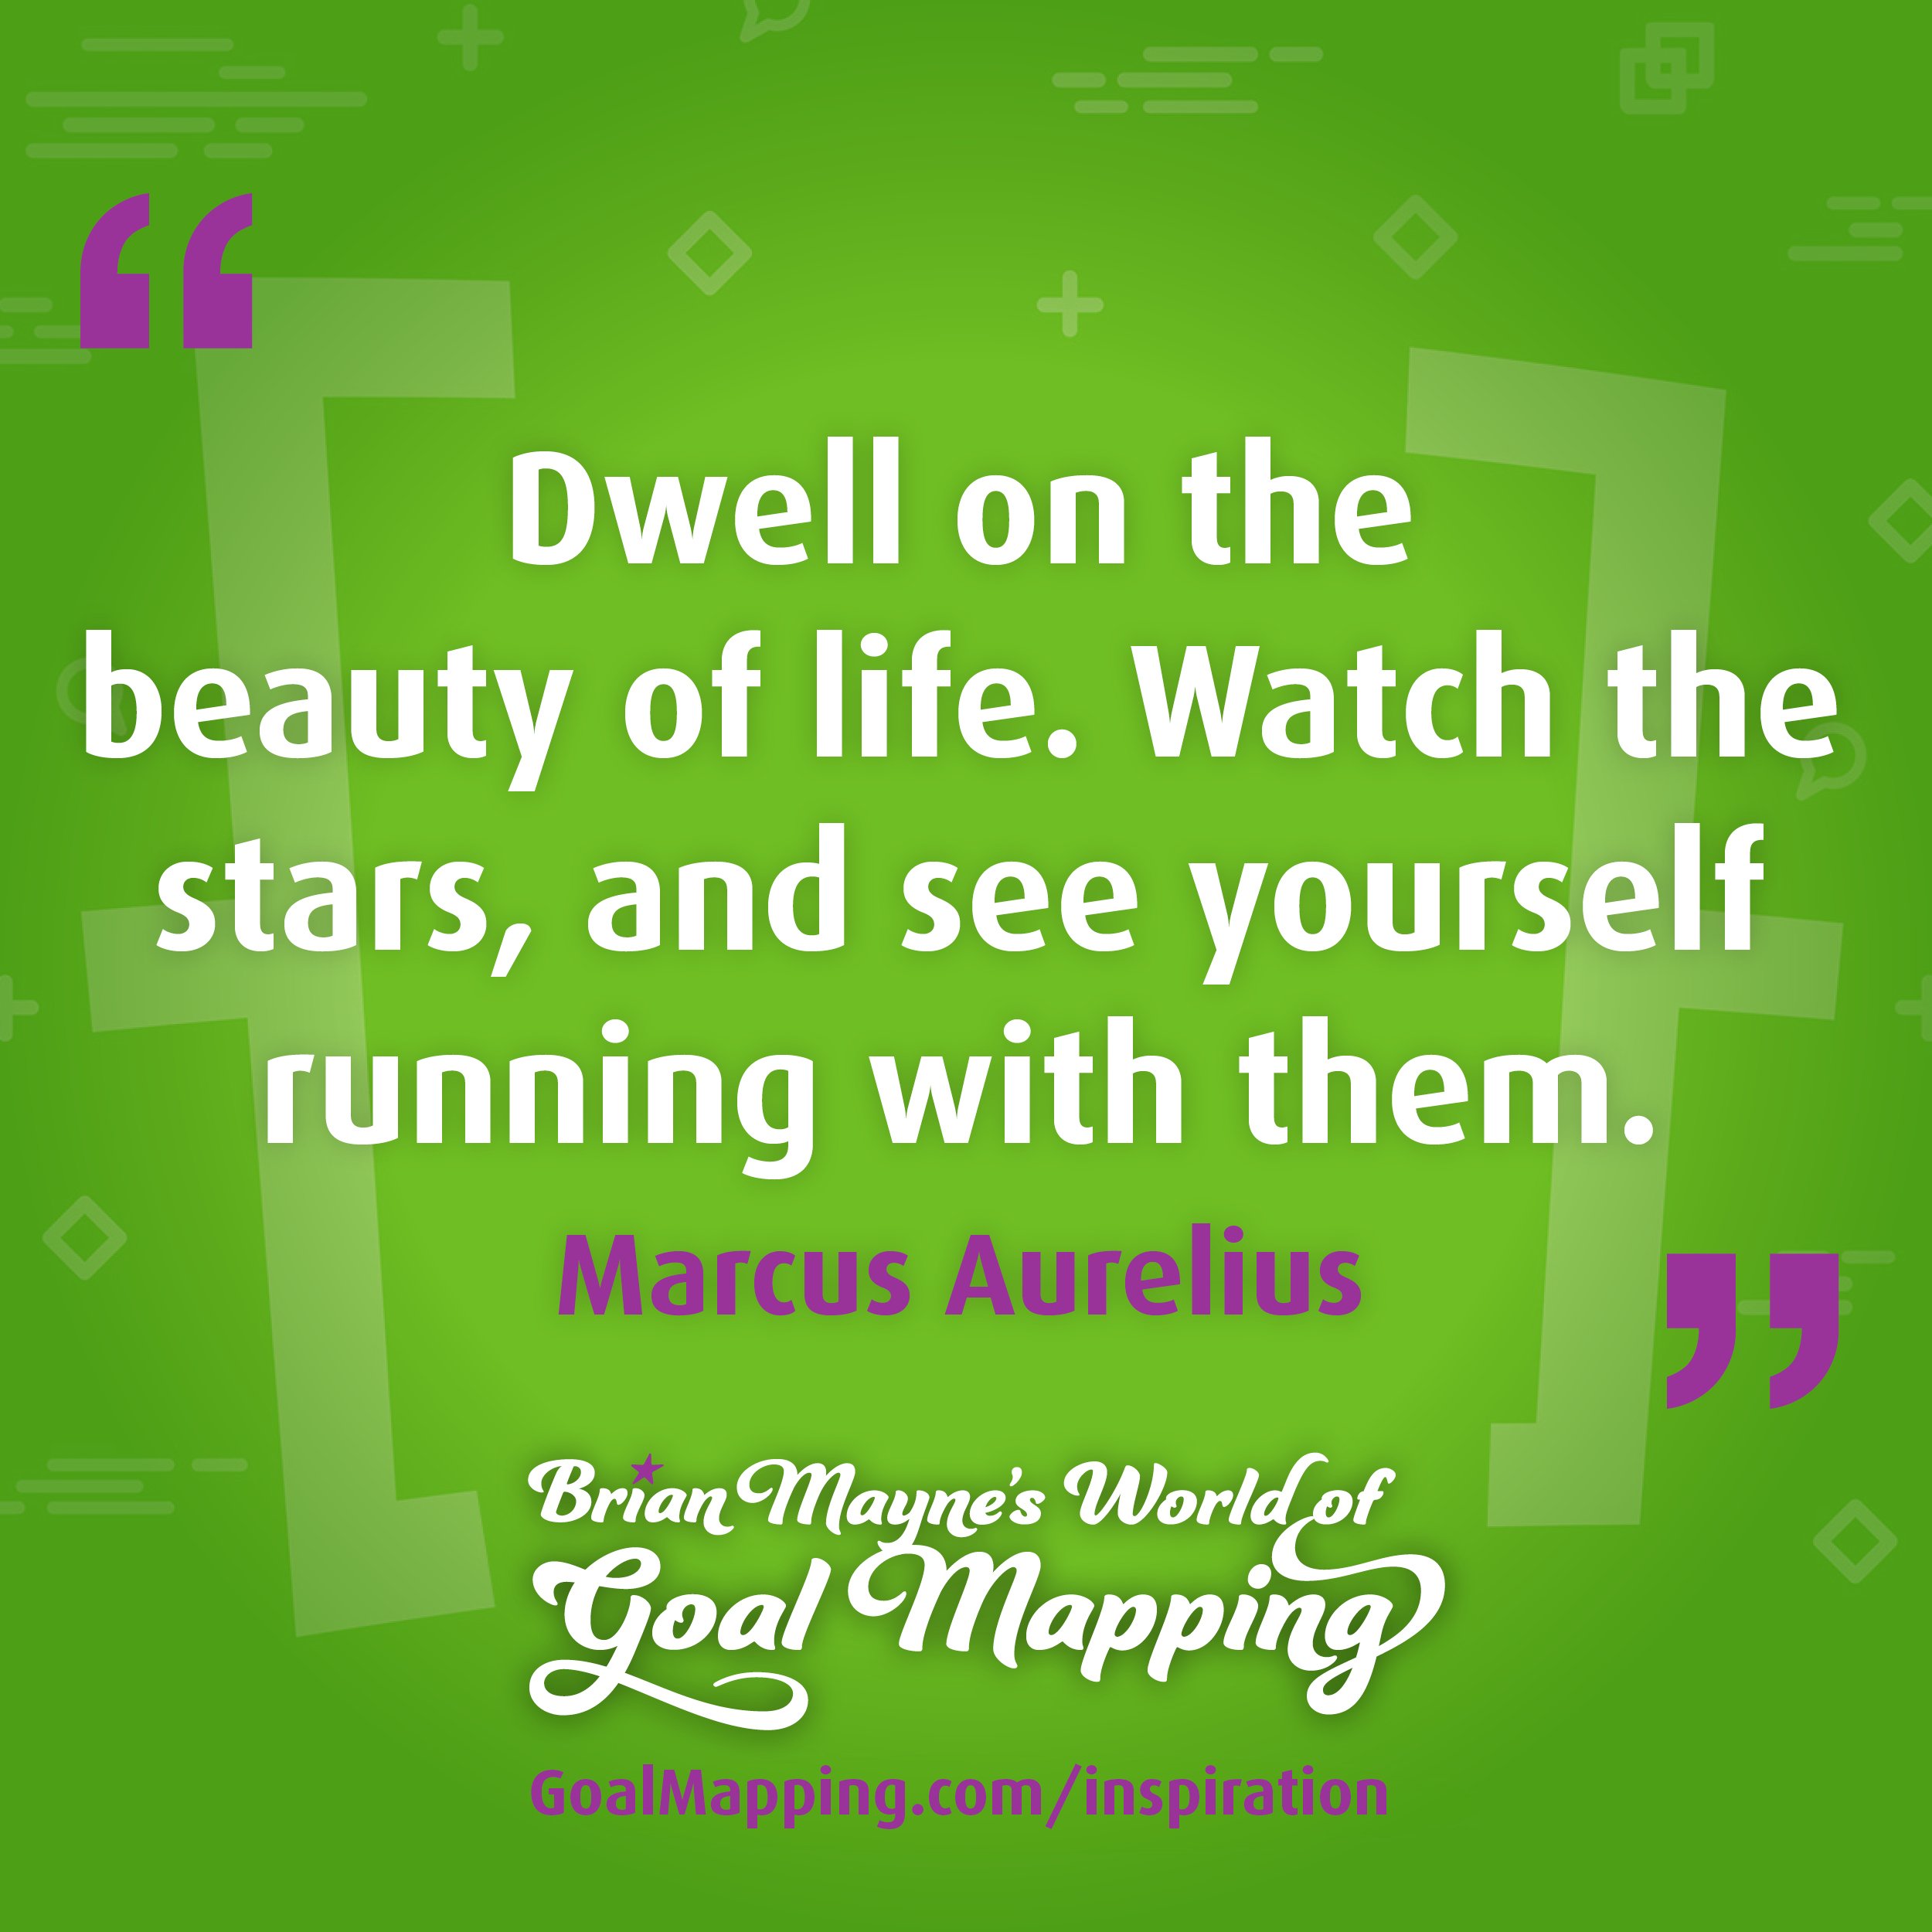 "Dwell on the beauty of life. Watch the stars, and see yourself running with them." Marcus Aurelius